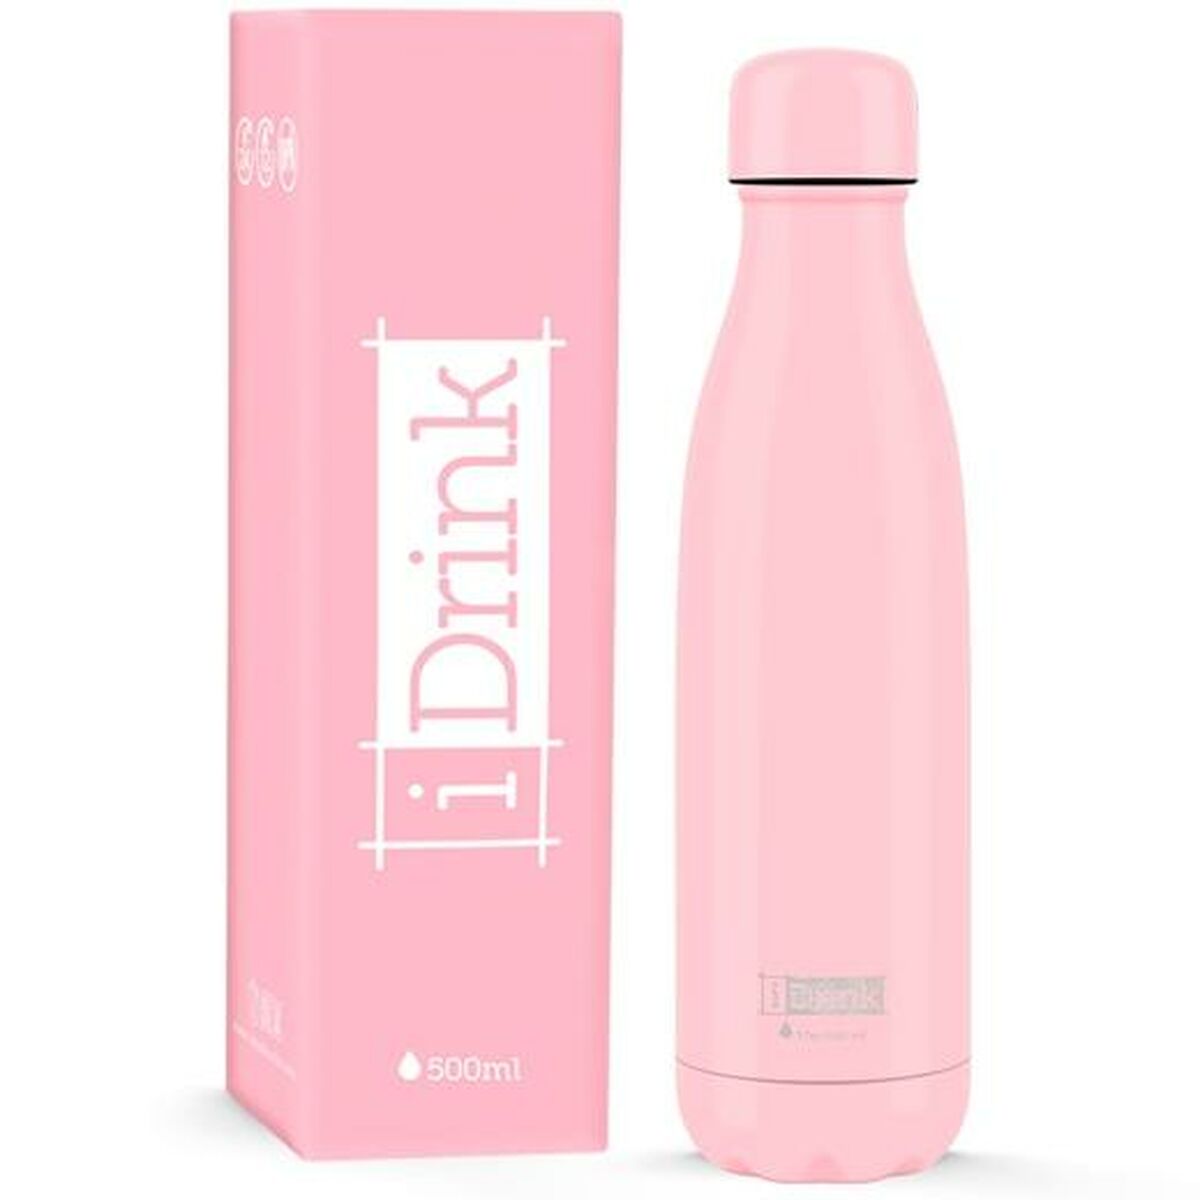 Thermosflasche iTotal Rosa Edelstahl (500 ml)